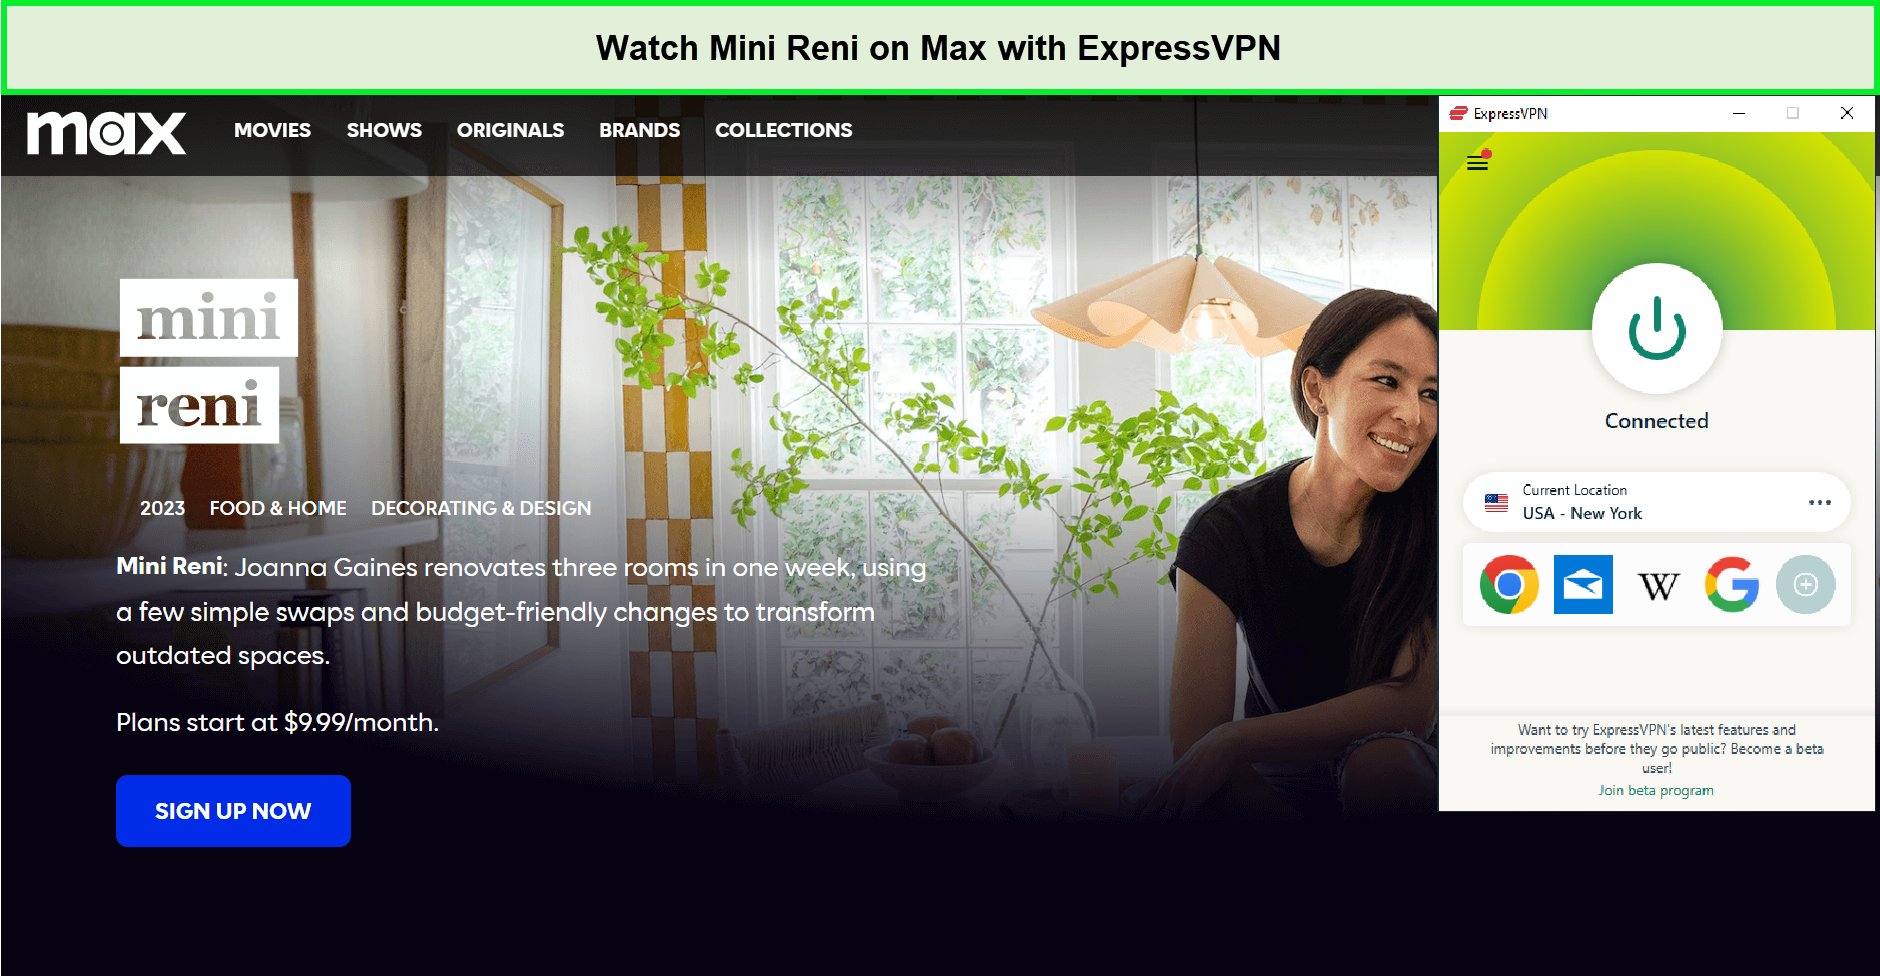 Watch-Mini-Reni-in-Japan-on-Max-with-ExpressVPN